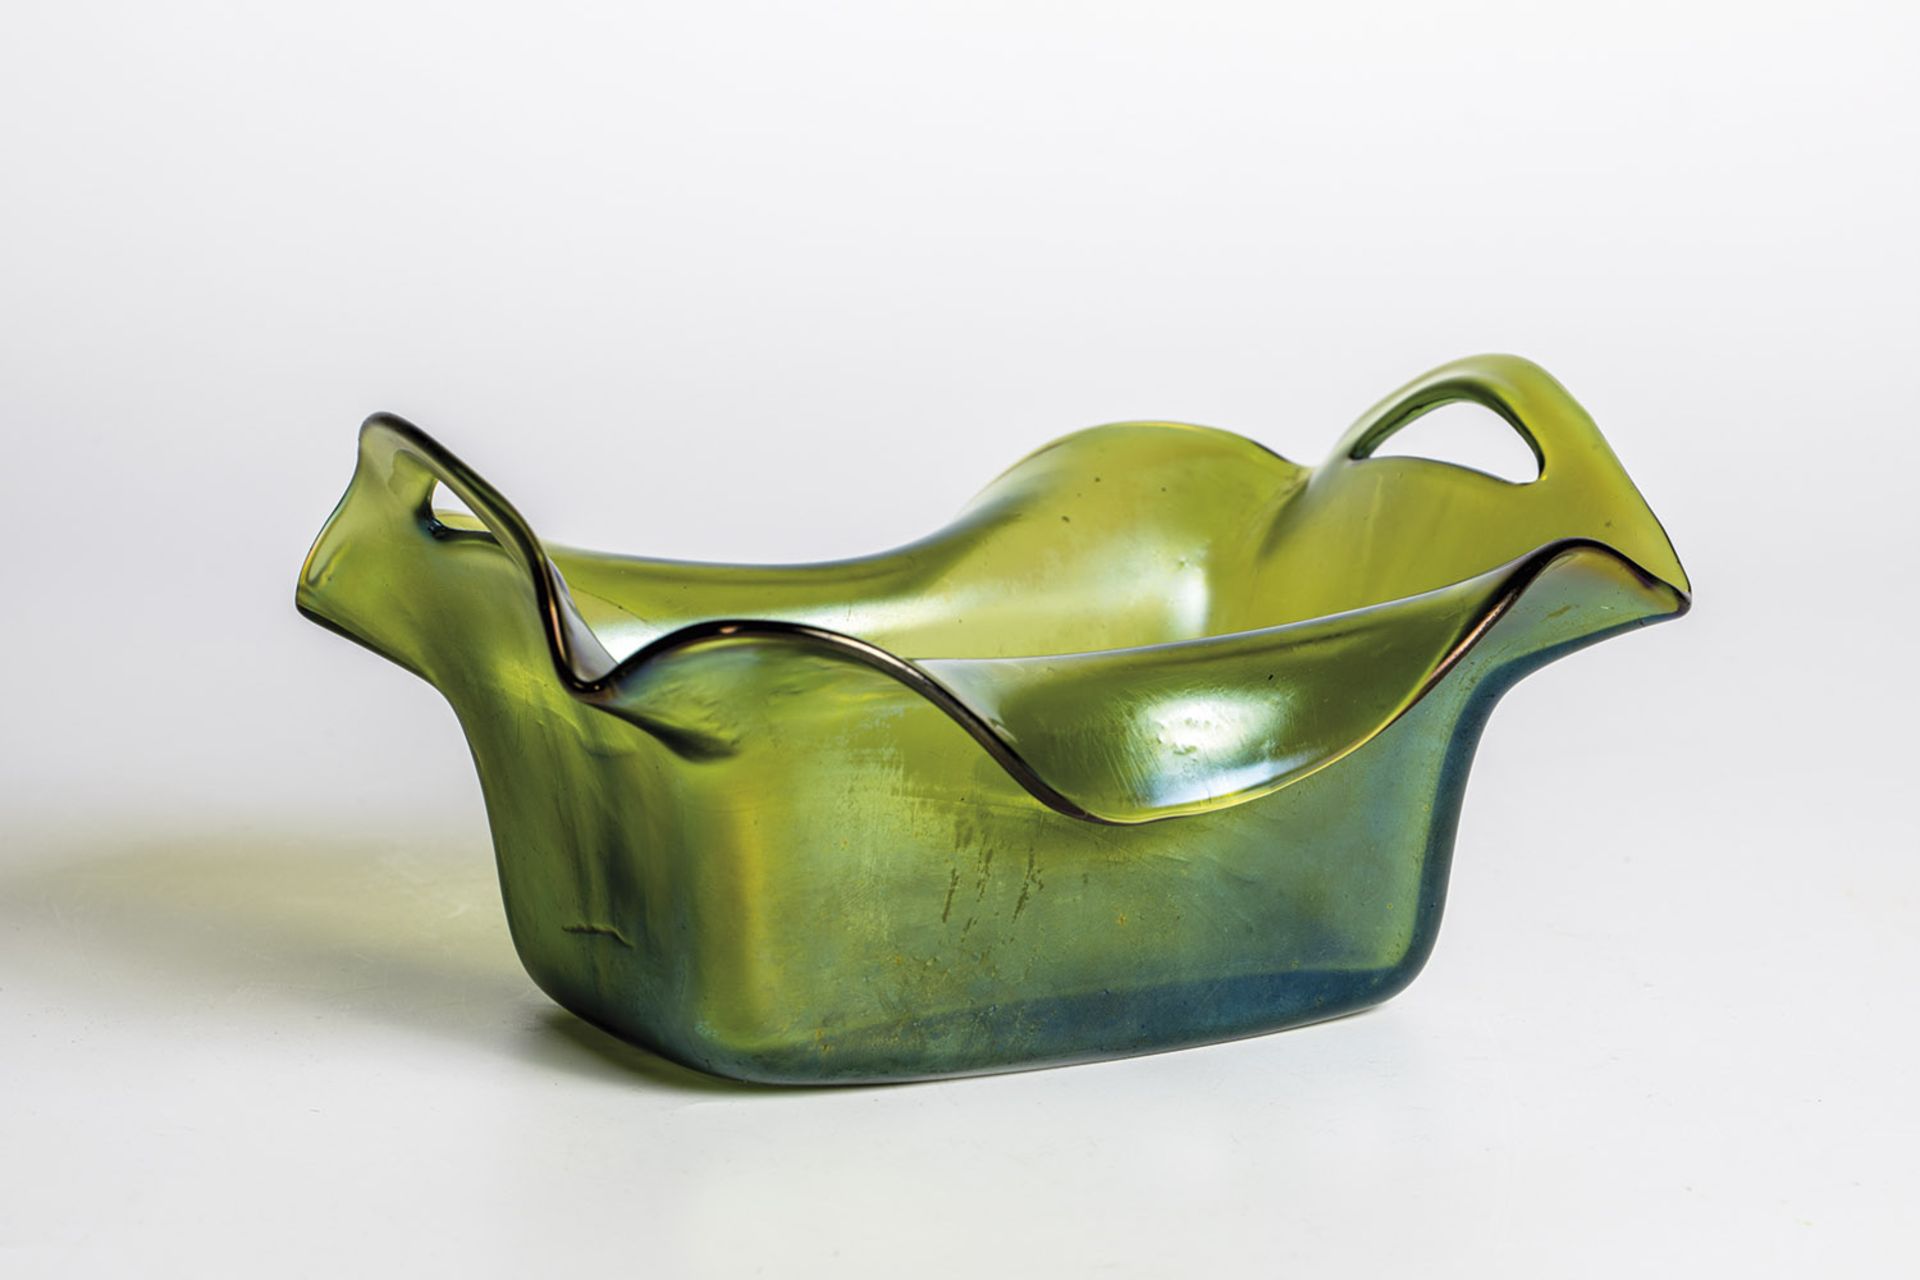 Bowl Bohemia, ca. 1910 Green glass. The muzzle rim lobed and warped with lateral recesses acting